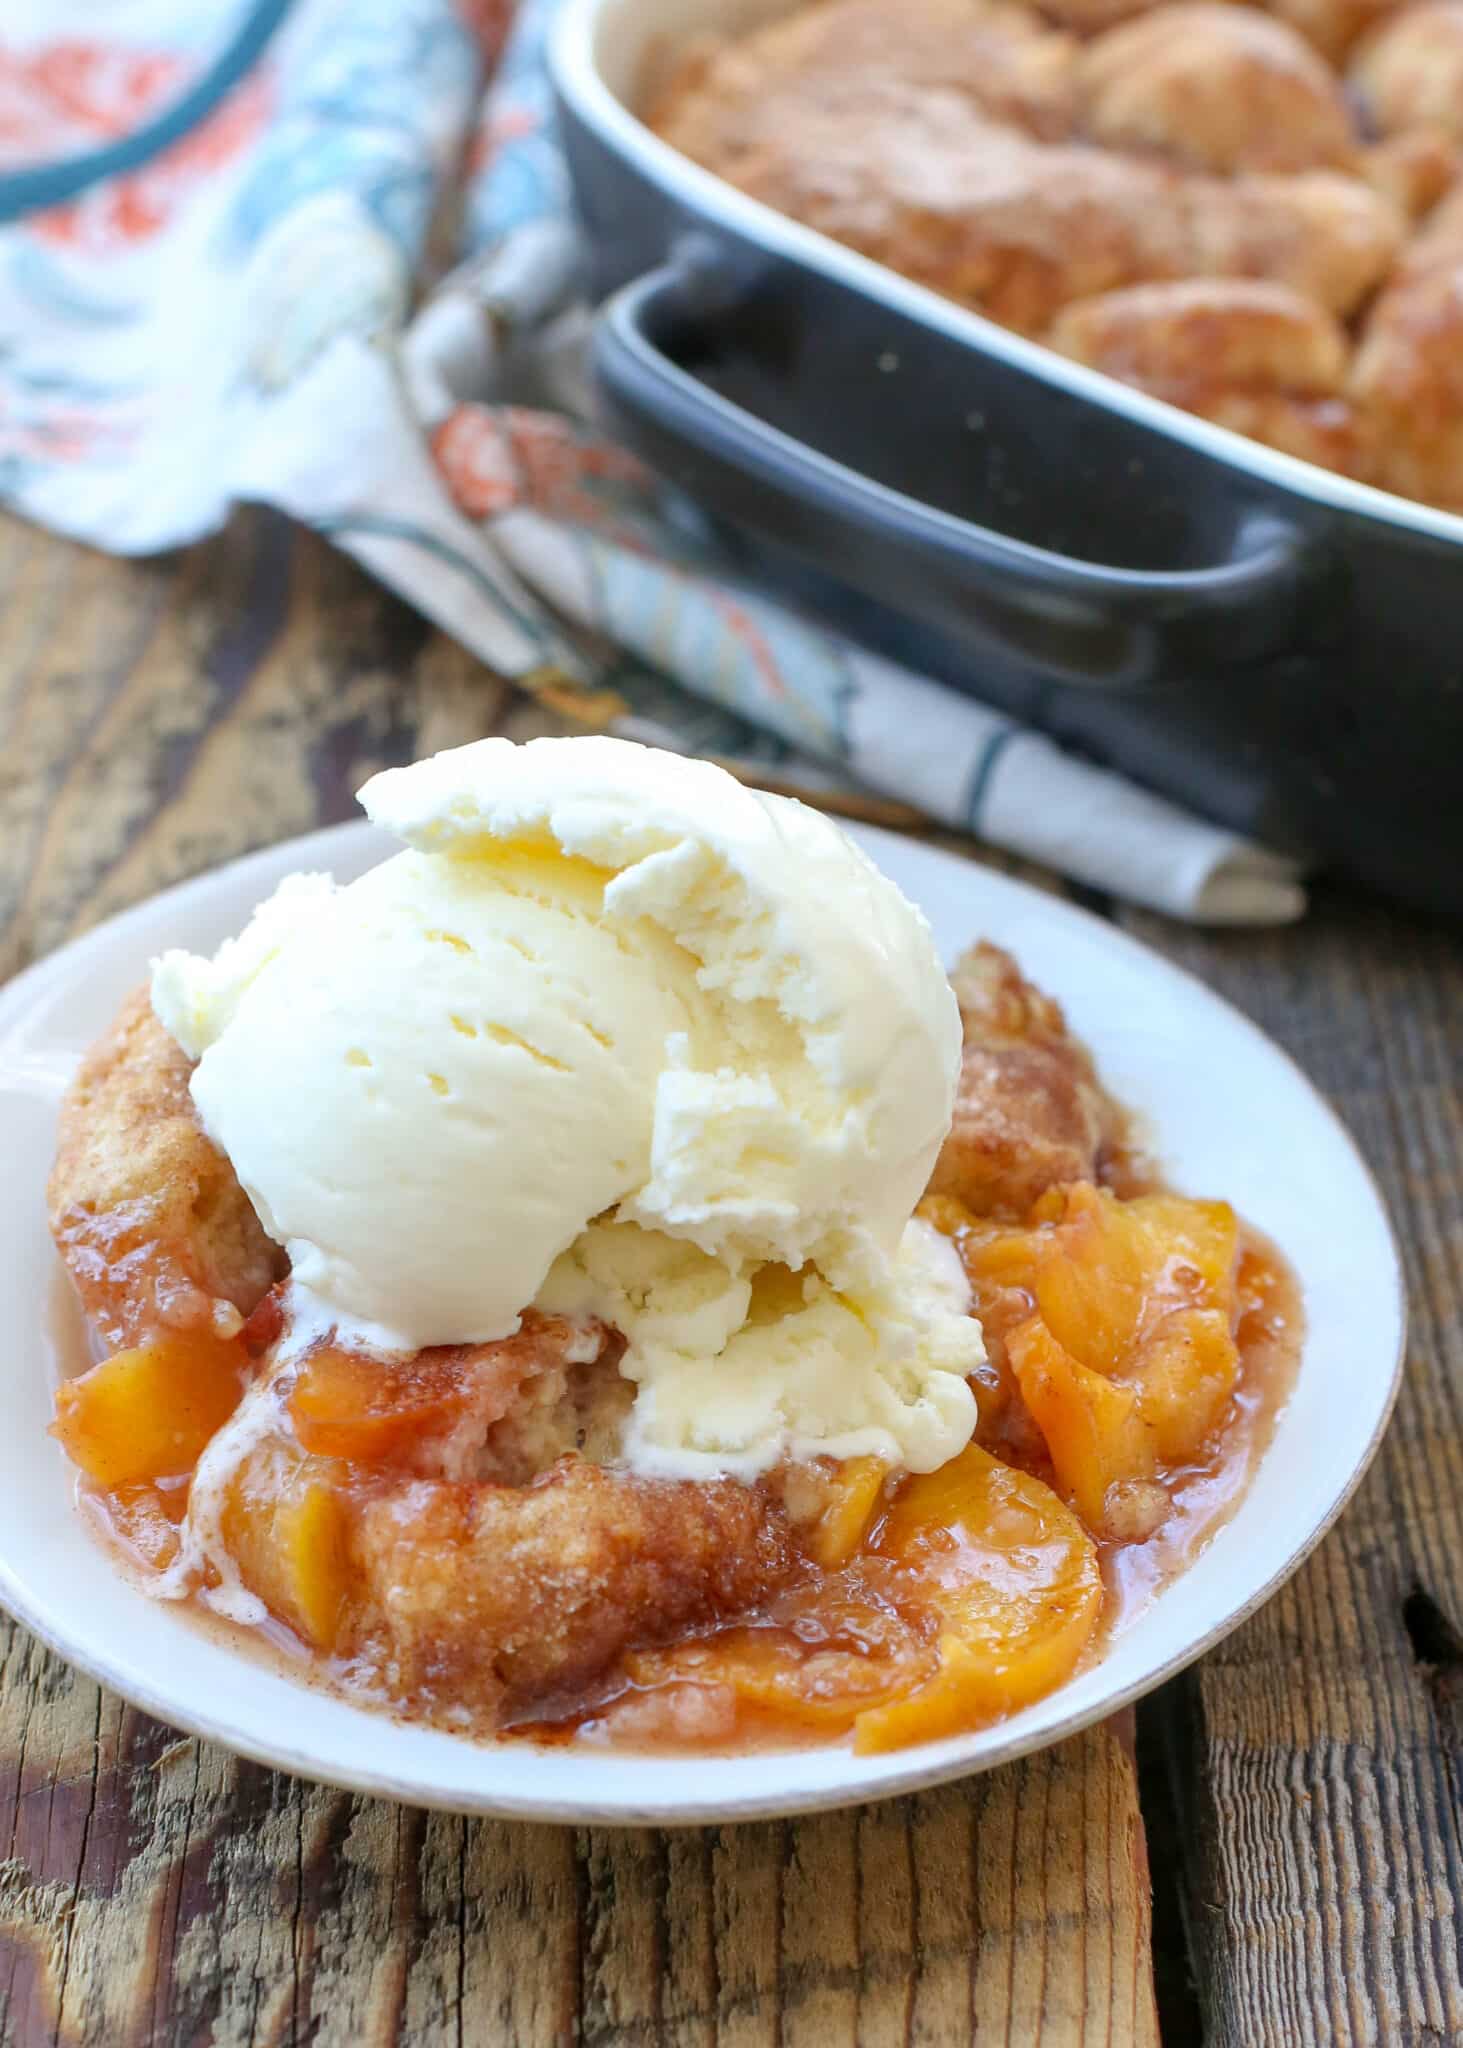 Southern Peach Cobbler 3 1 Of 1 1463x2048 